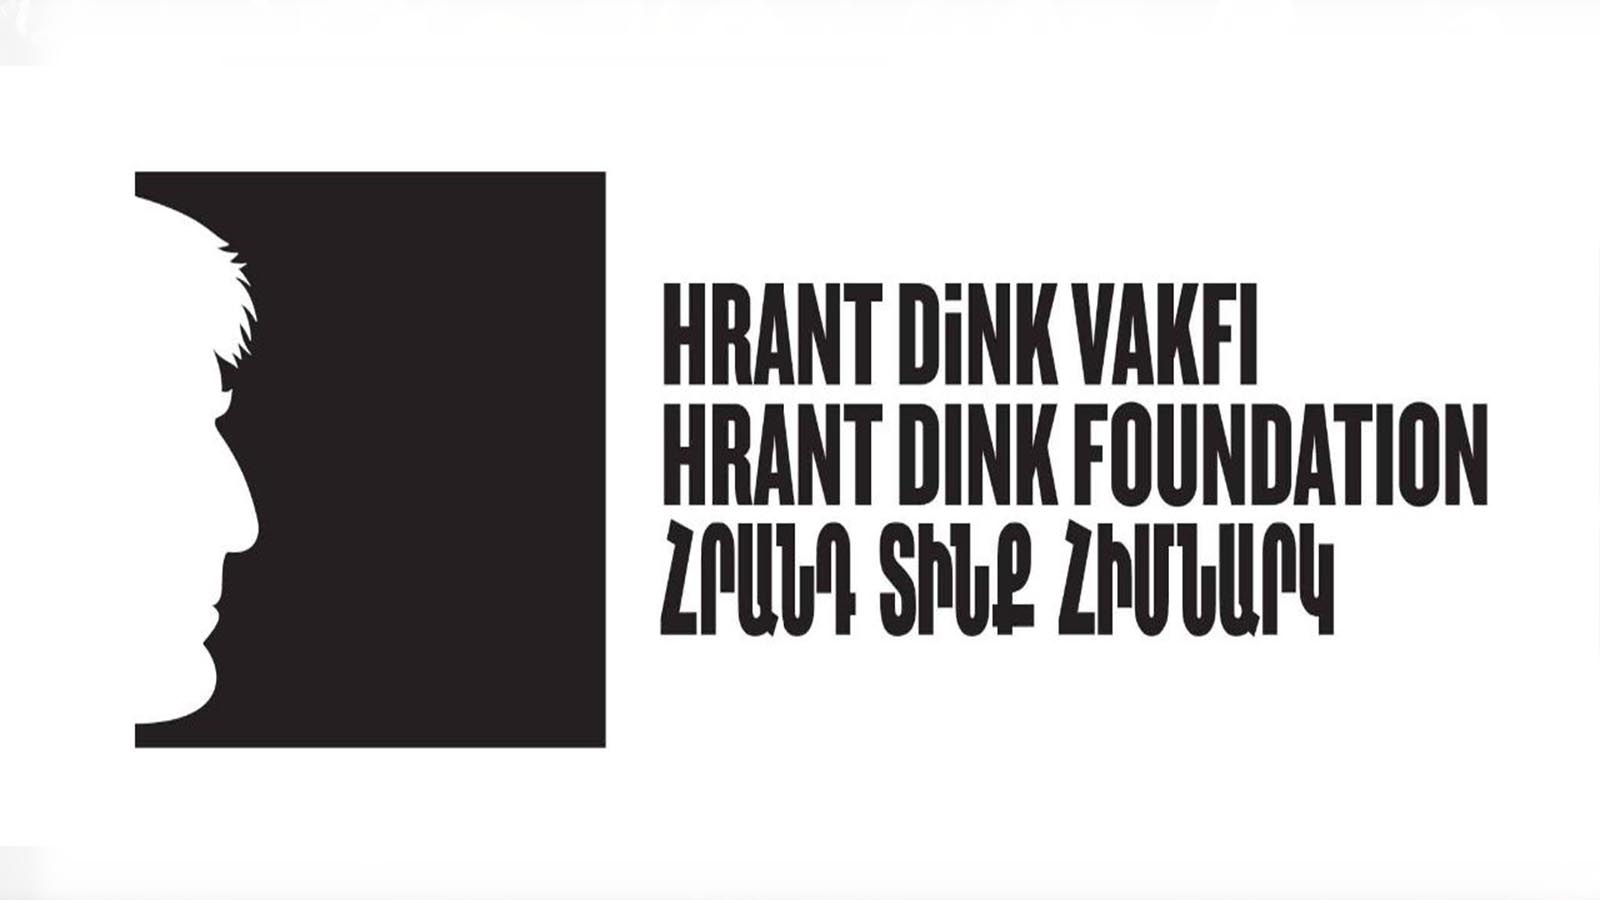 The person who sent a threat message to the Hrant Dink Foundation is arrested